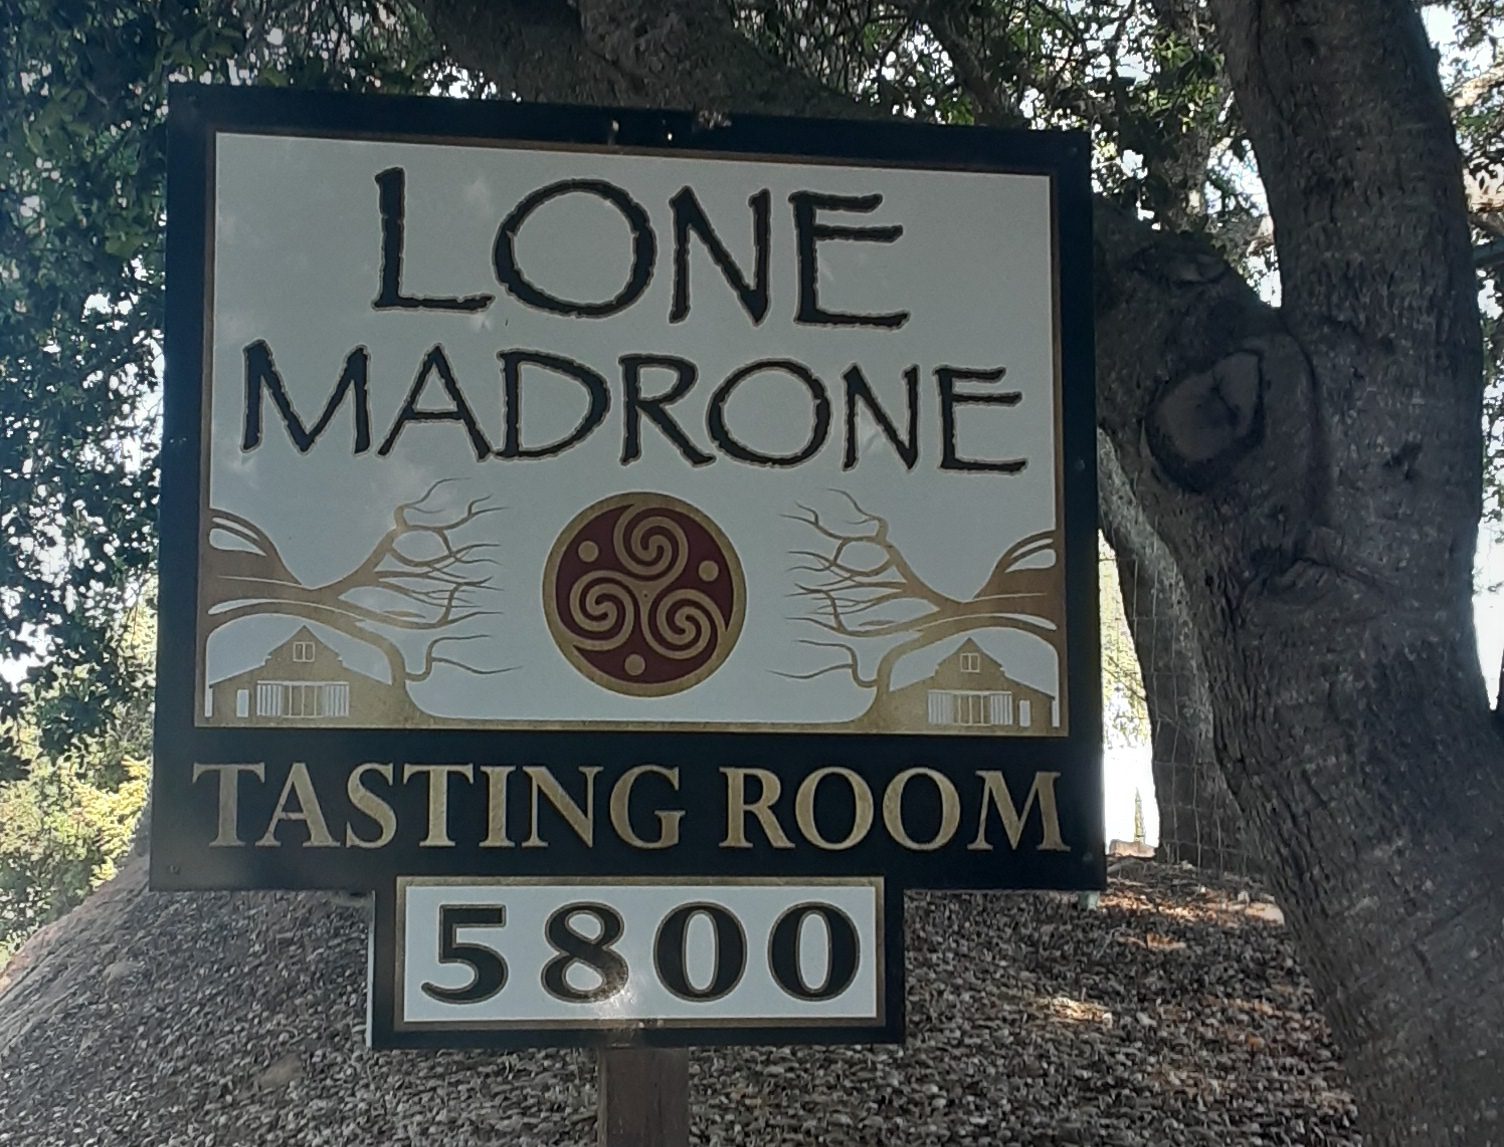 Lone Madrone